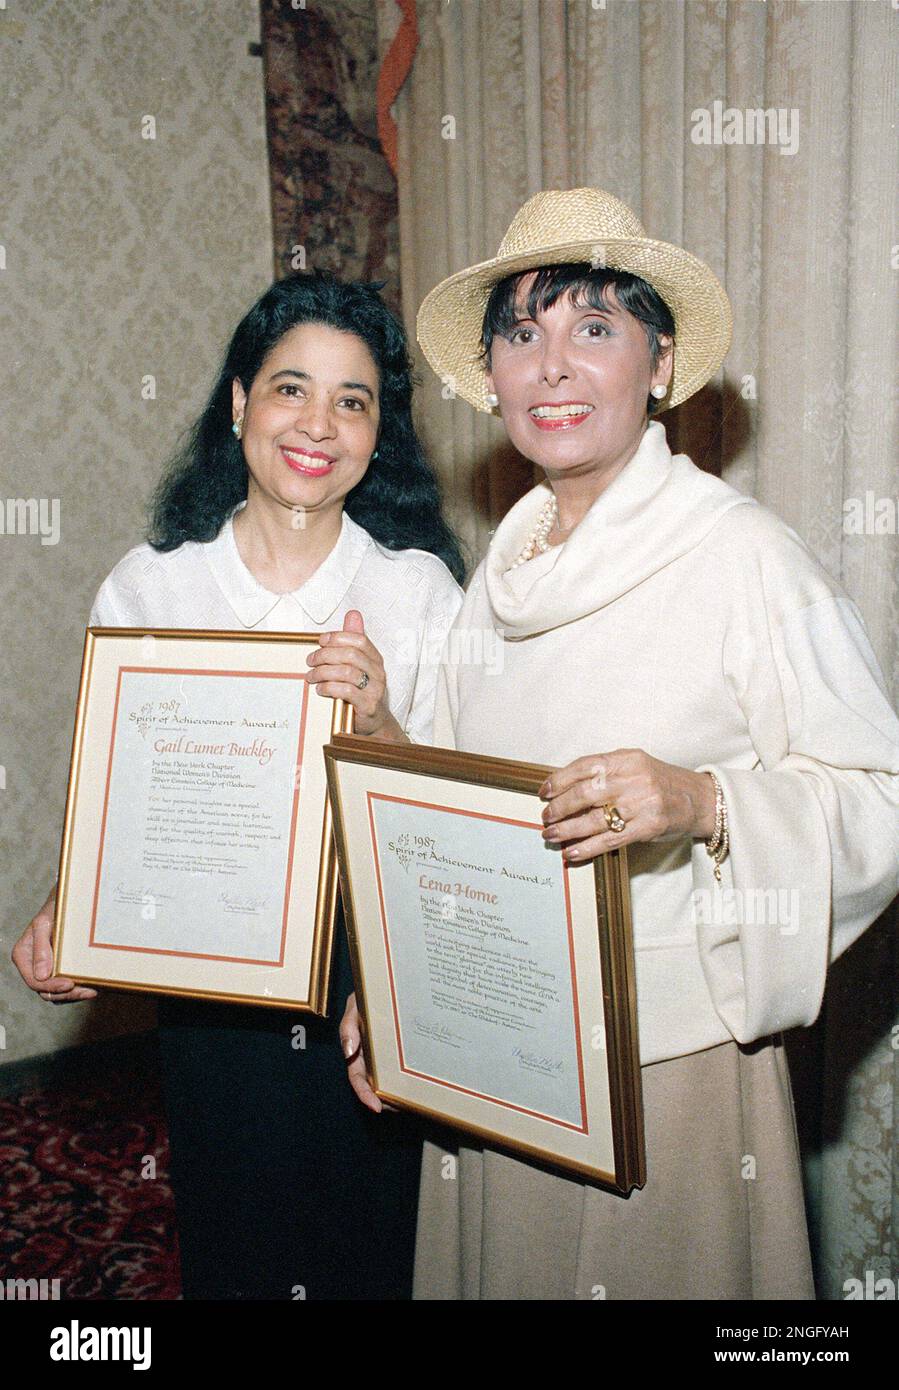 Performer Lena Horne Right And Her Daughter Gail Lumet Buckley Are